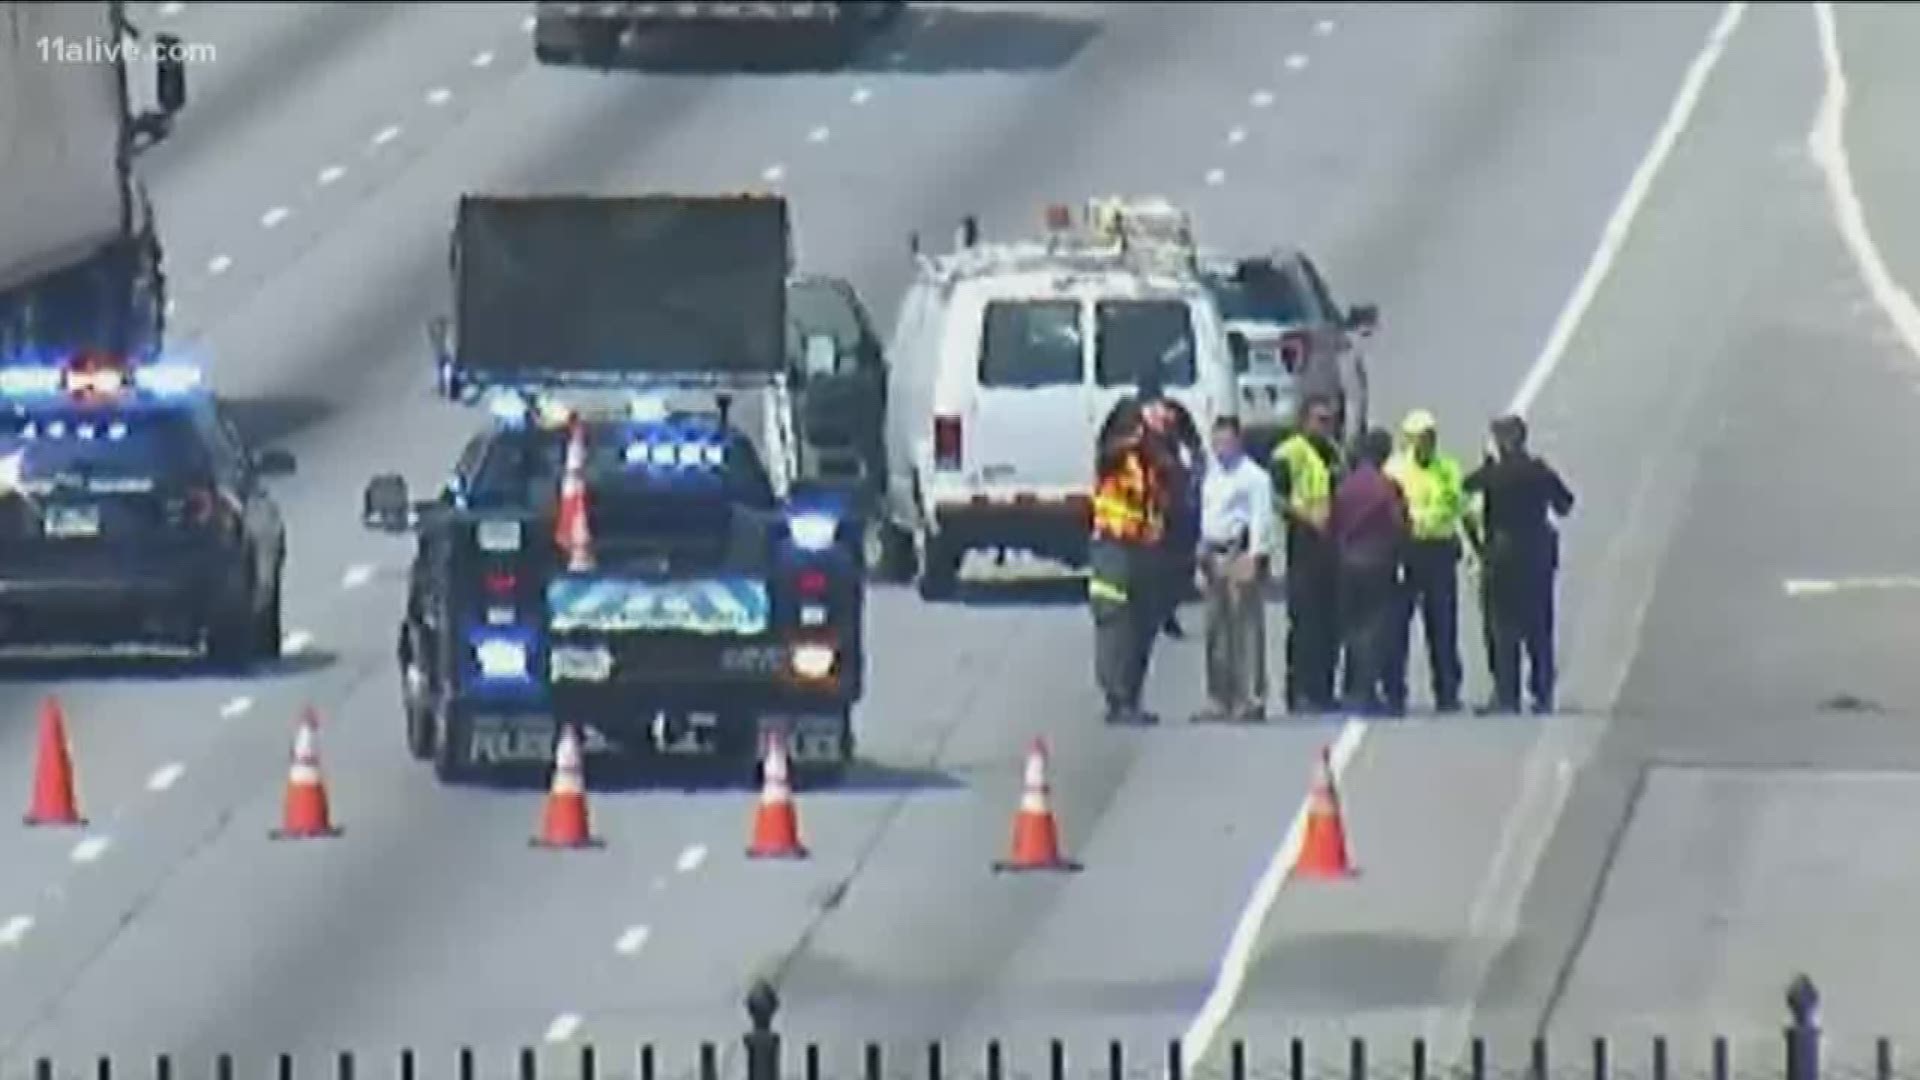 At around 11:30 a.m., authorities confirmed that two officers pulled over a vehicle on Ashford Dunwoody at I-285 for a texting and driving violation. The driver fled and dragged one of the officers onto I-285.